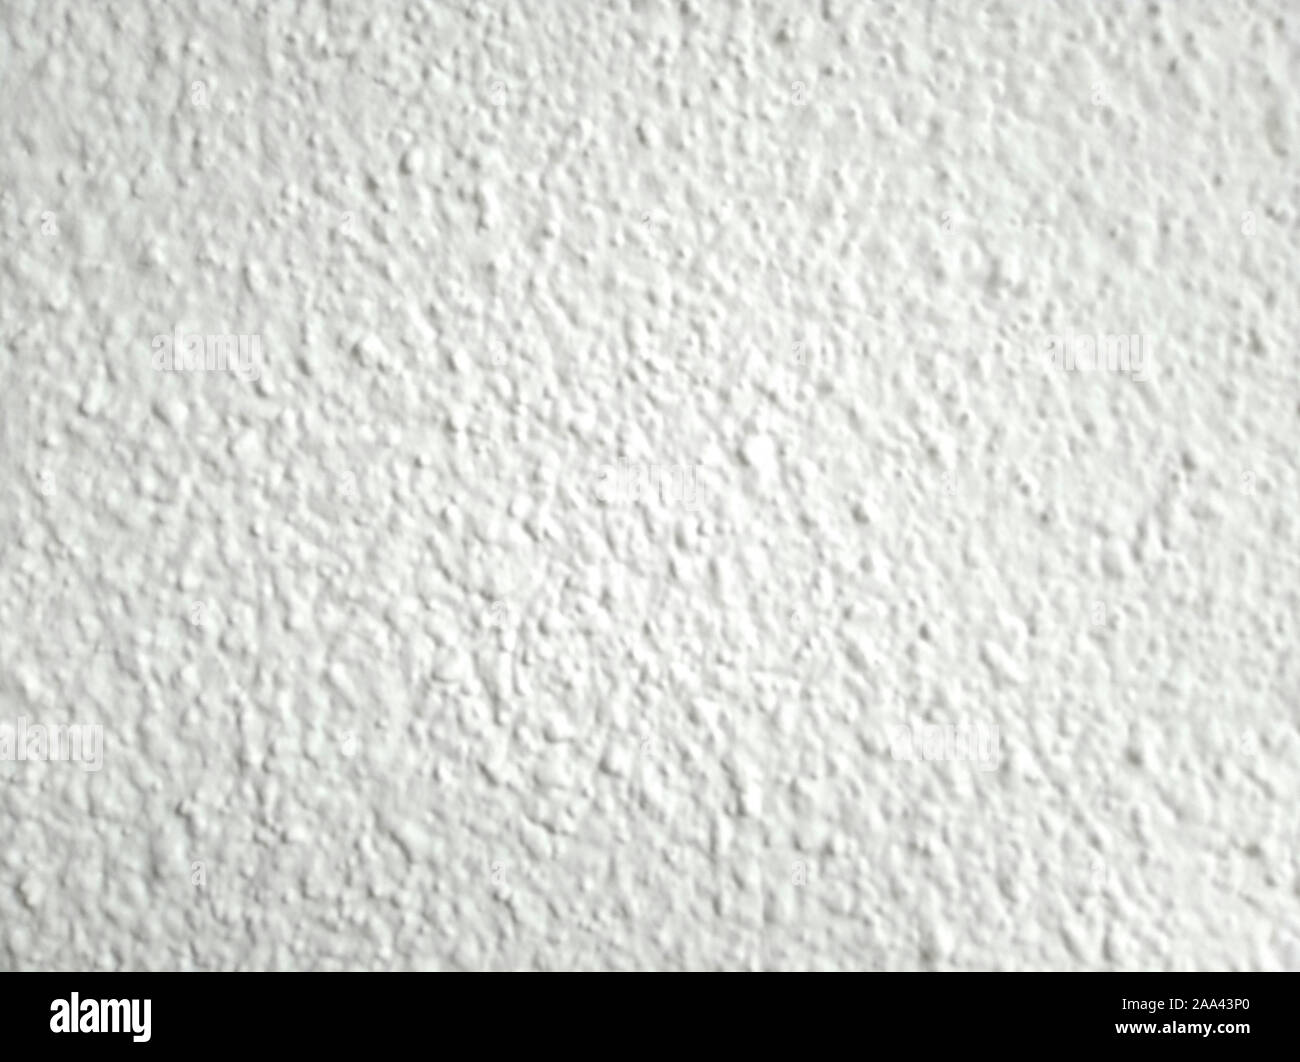 Wall background texture - rustic bumpy flat white surface Stock Photo